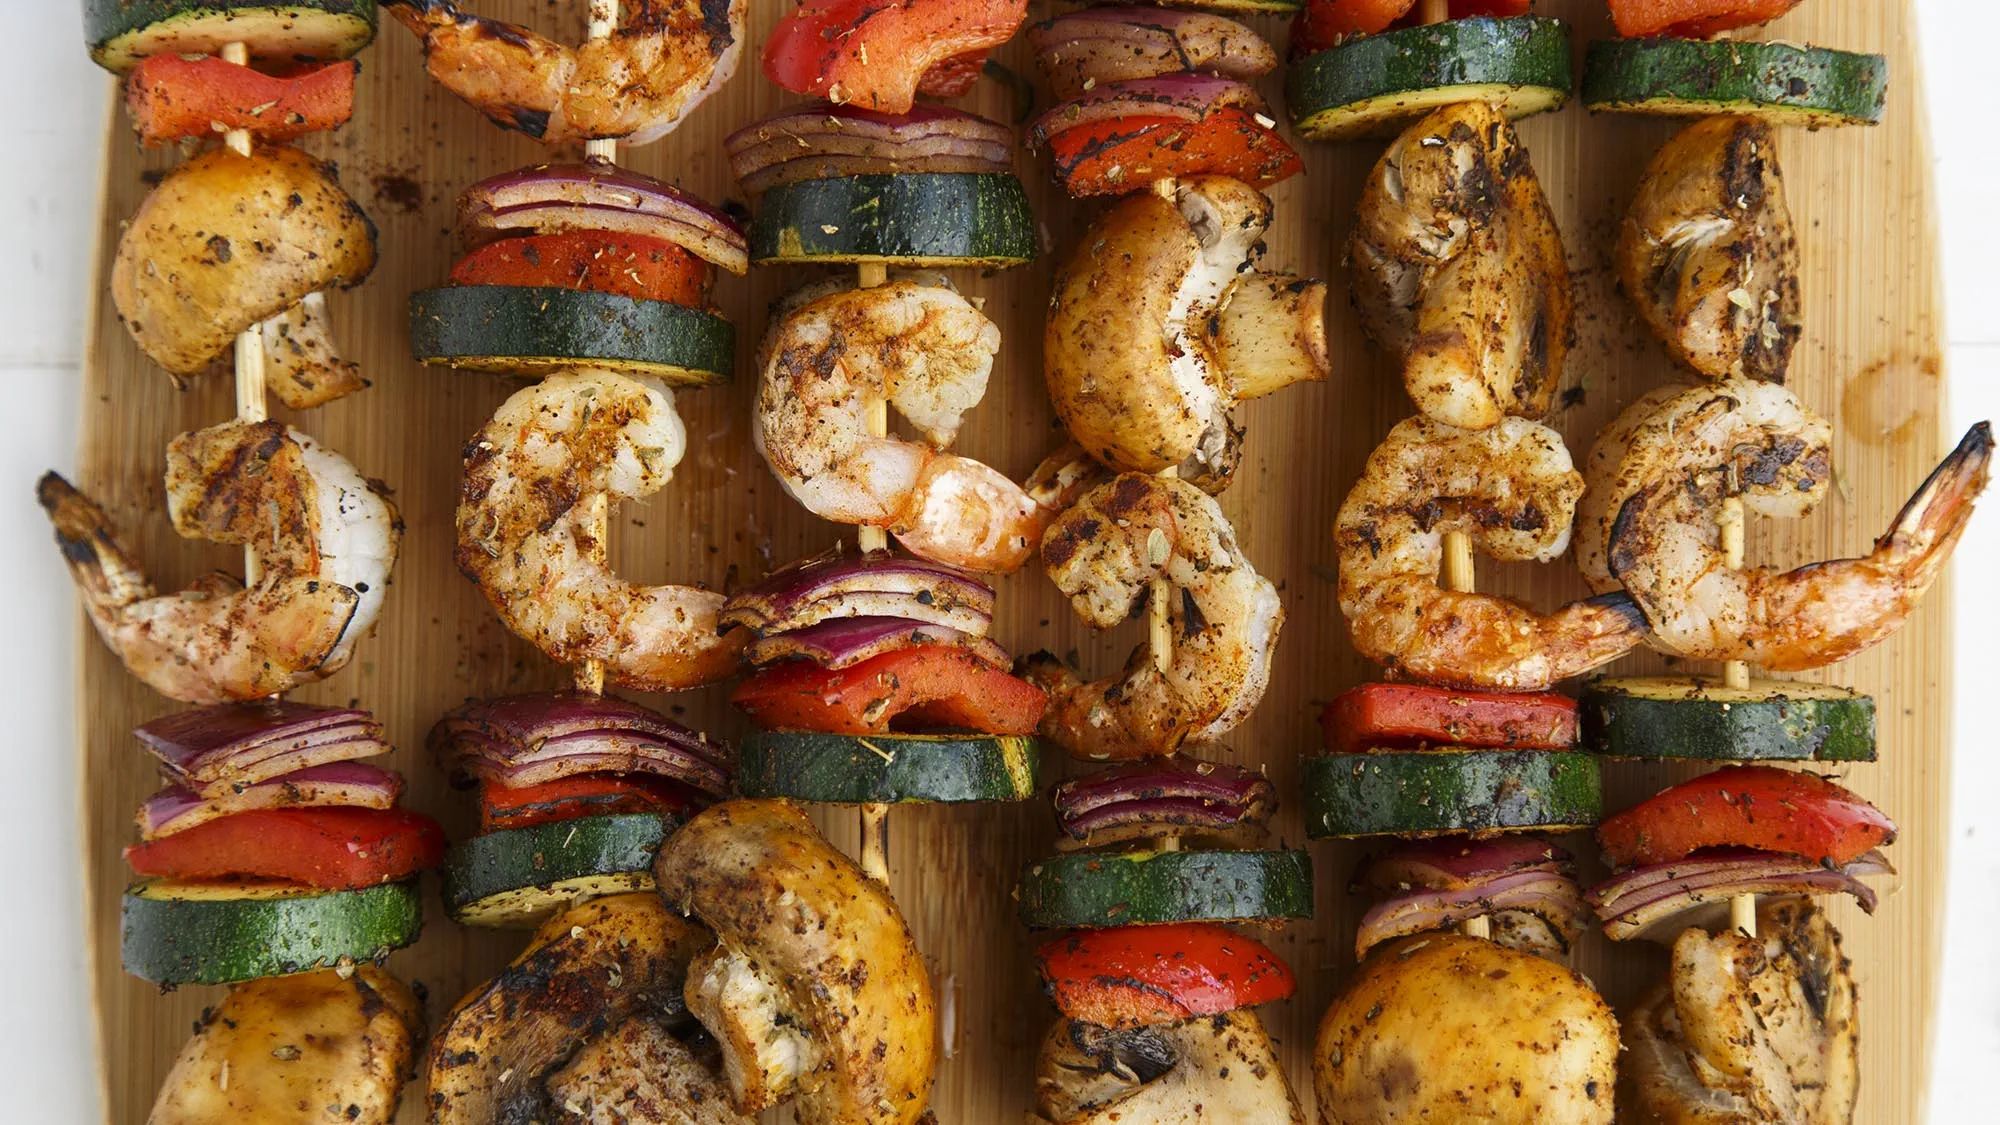 MEXICANA SHRIMP AND VEGETABLE KEBABS